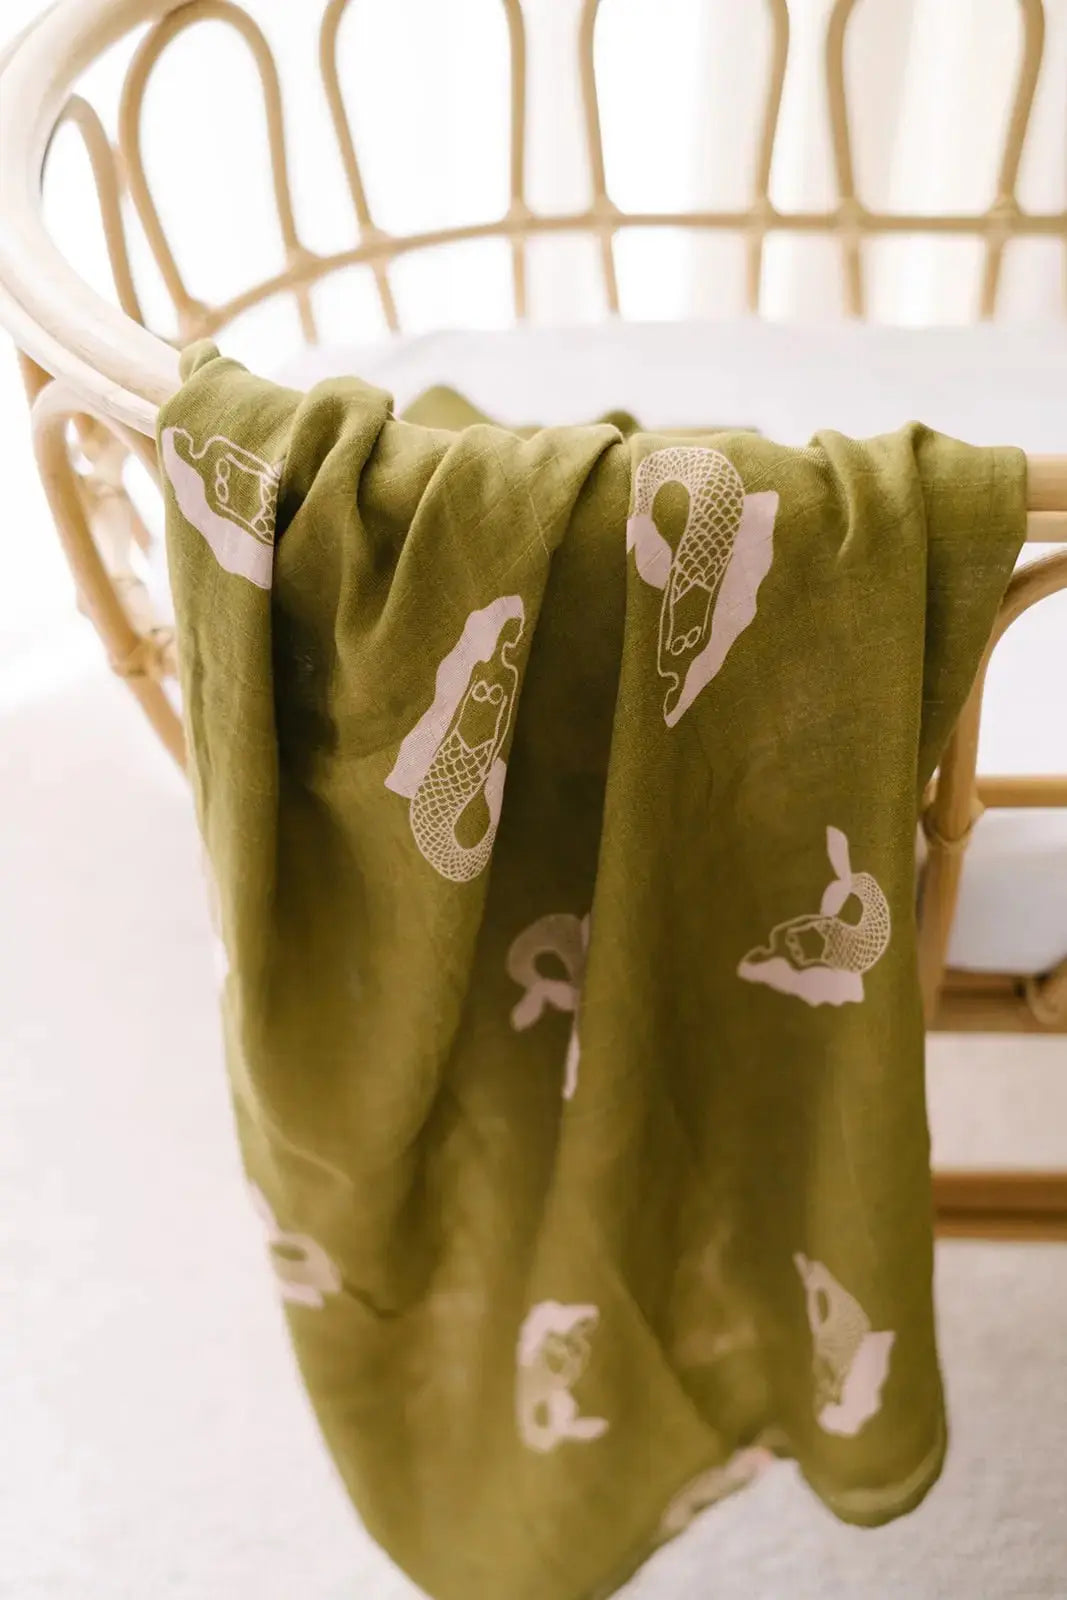 Mermaid muslin swaddle wrap hanging on cot close up